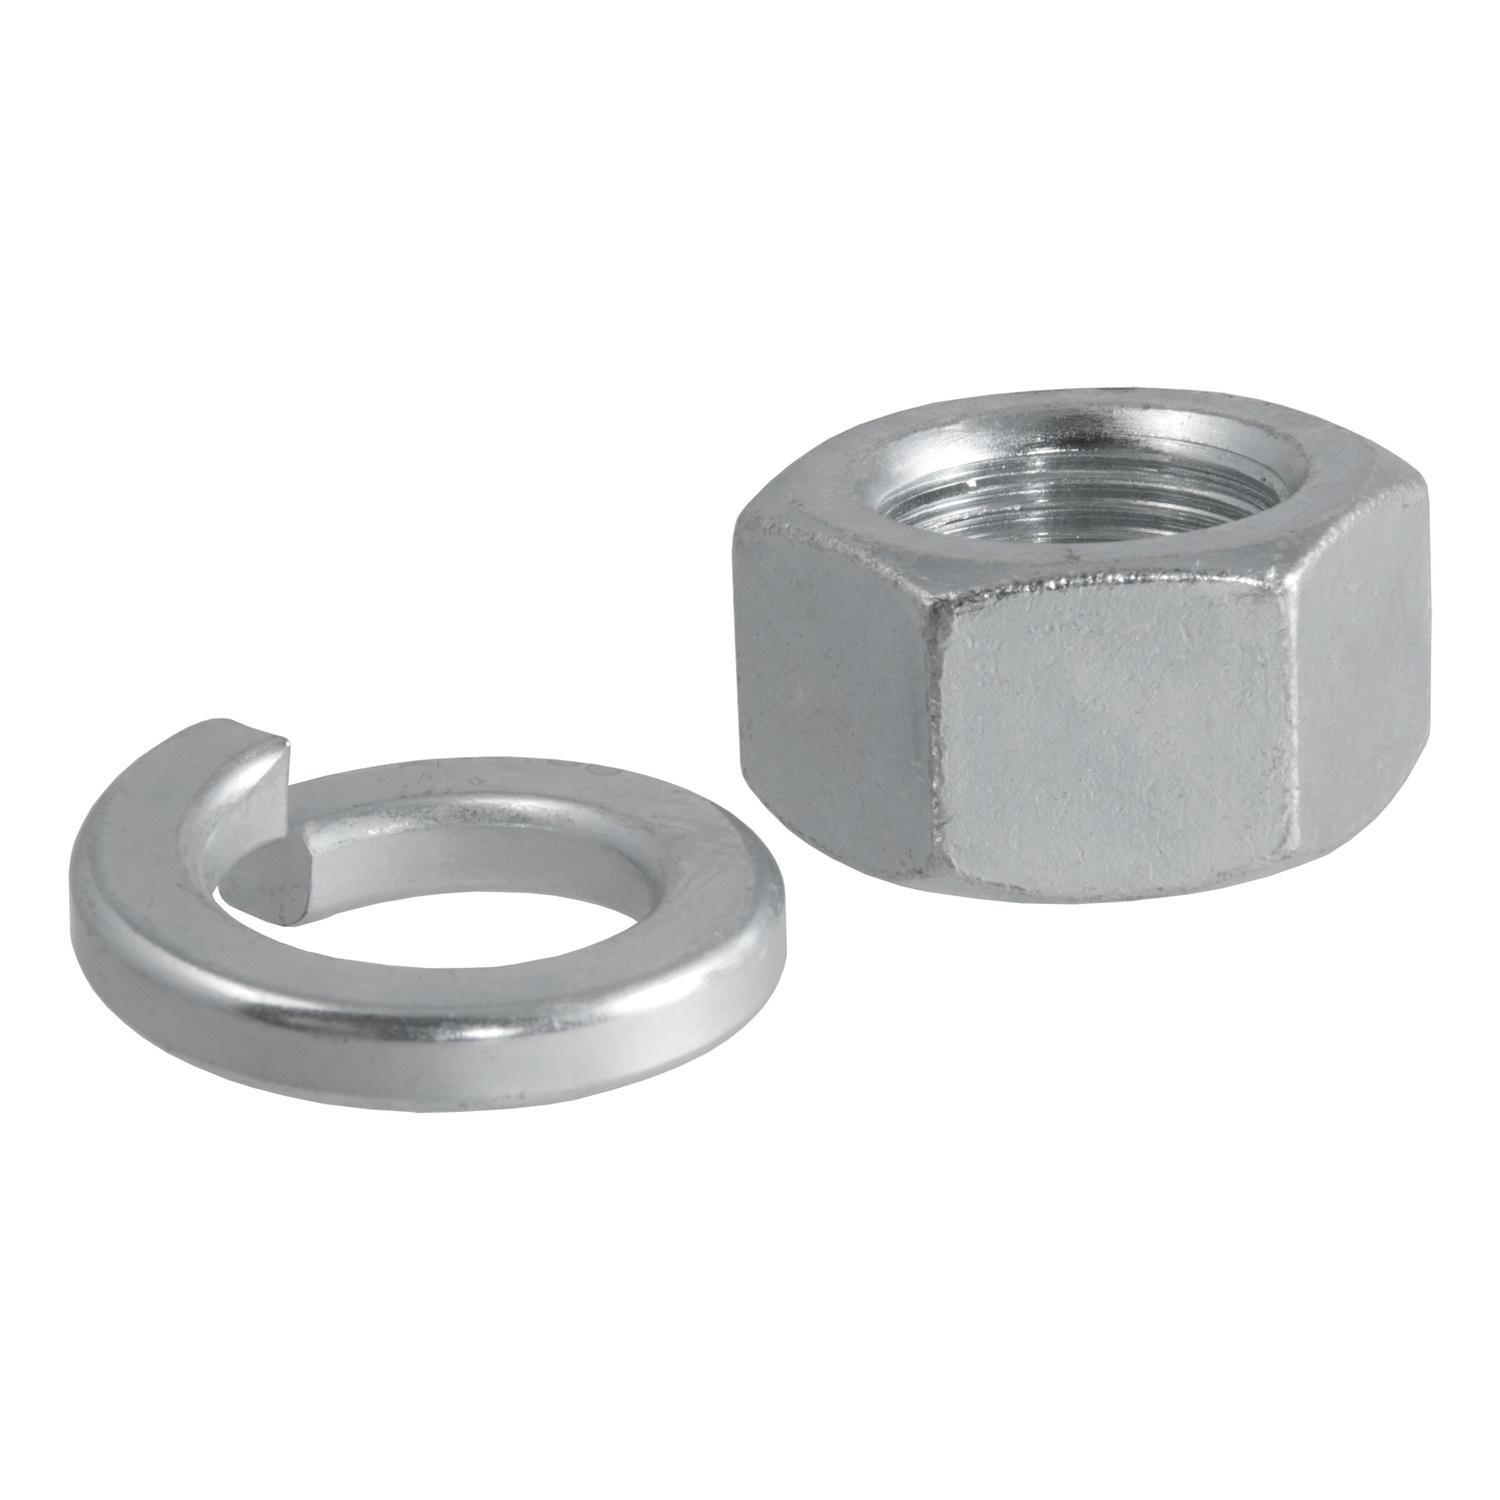 CURT Manufacturing CURT Manufacturing 40105 Nuts And Washers  Fits